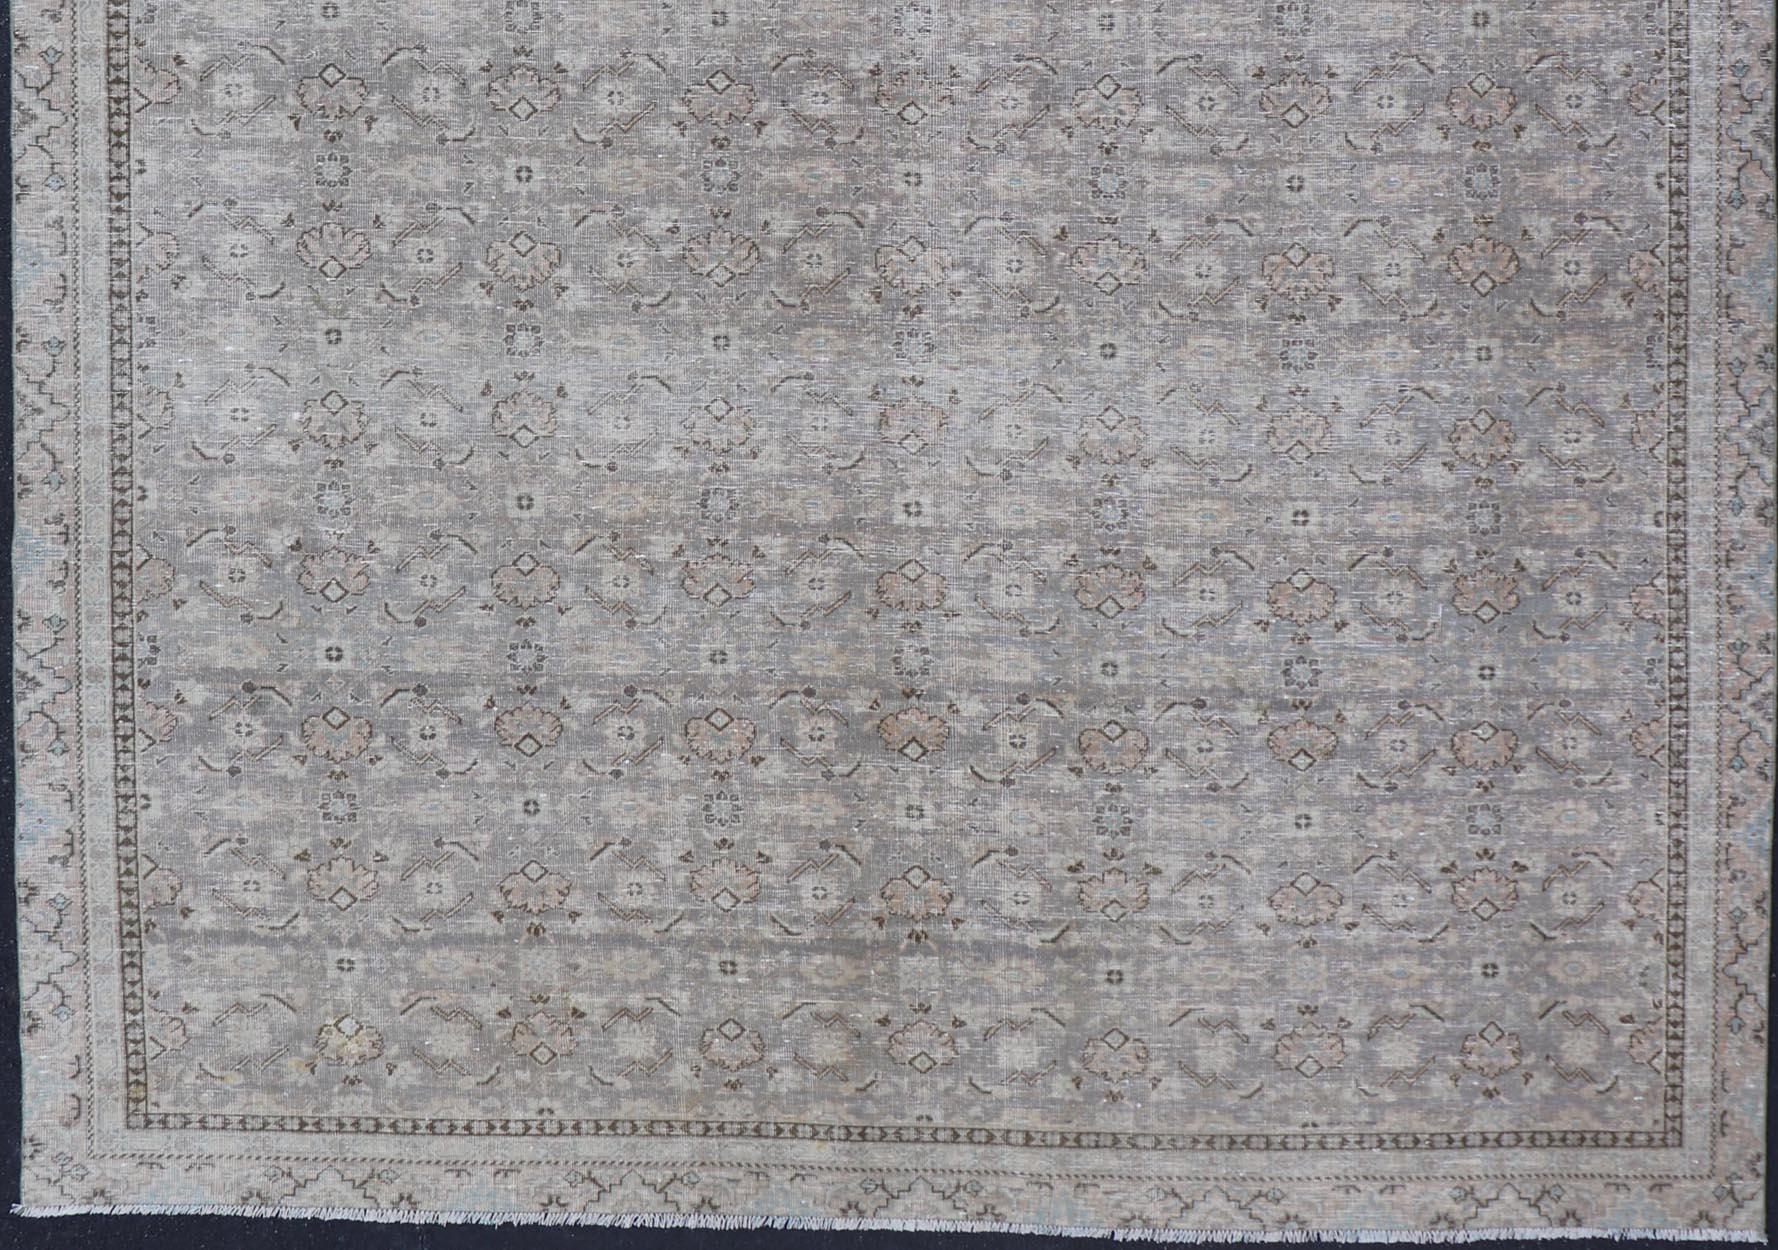 Antique Persian Tabriz Rug in All-Over Herati in Shades of Lavender and Tan  For Sale 2